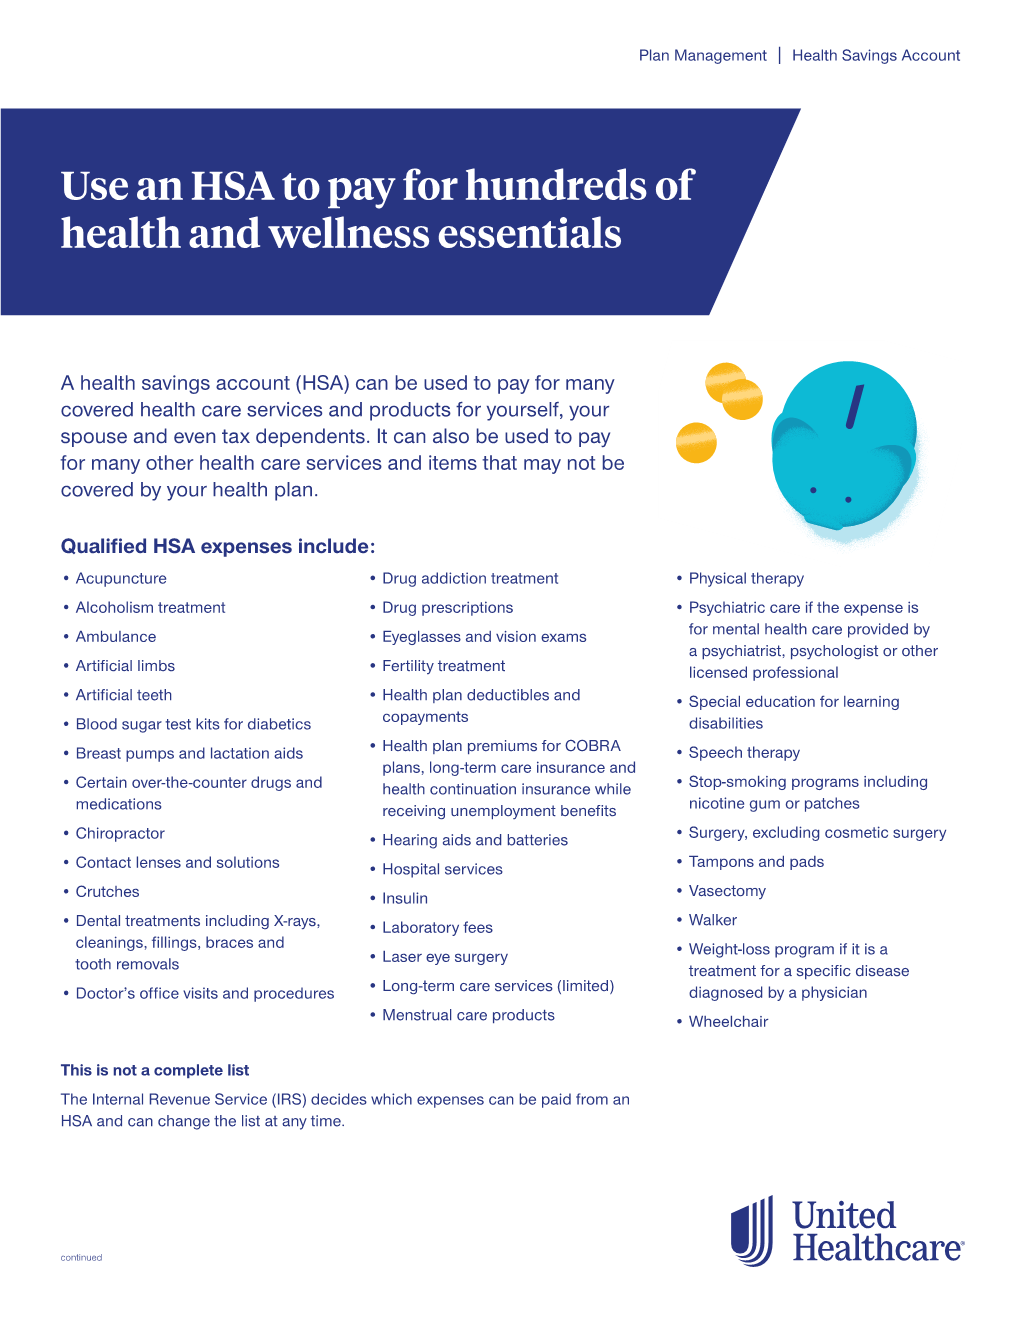 Use an HSA to Pay for Hundreds of Health and Wellness Essentials